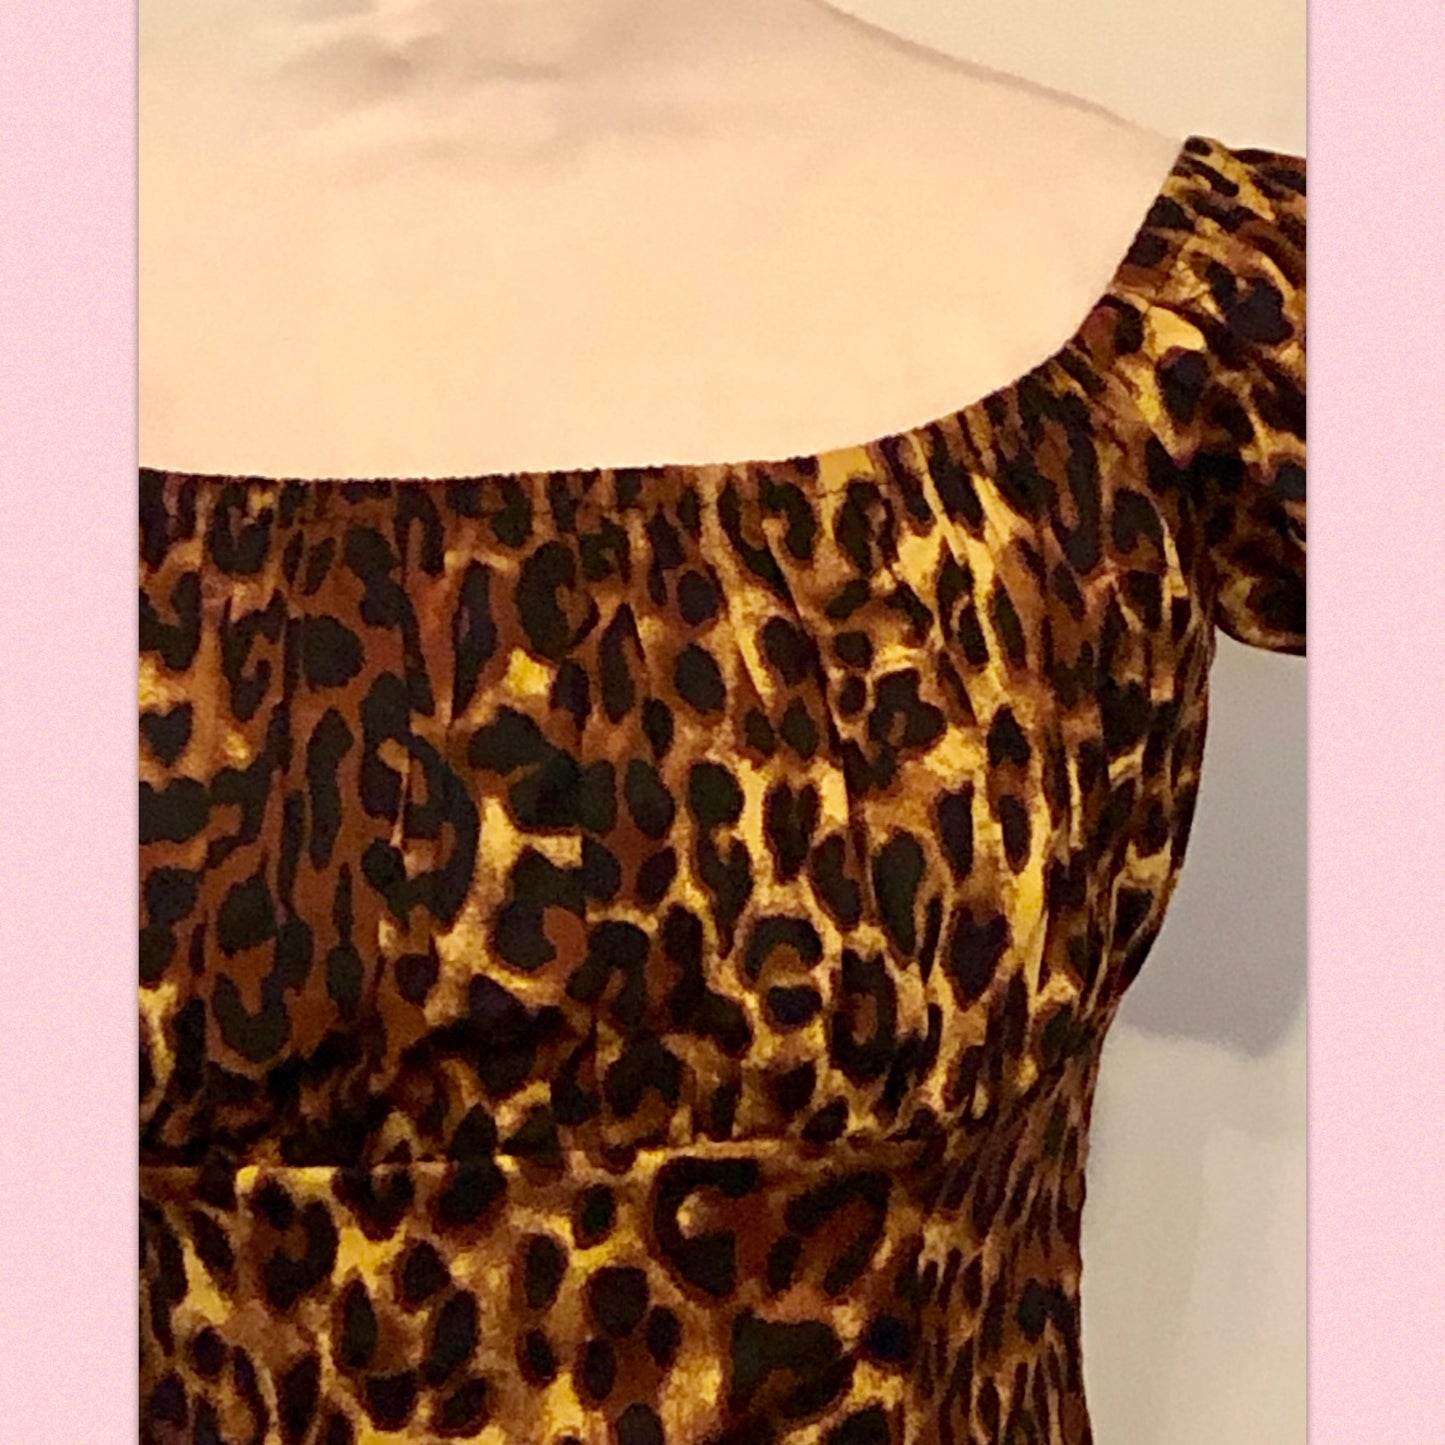 Vintage 1950s style leopard print fitted gypsy top